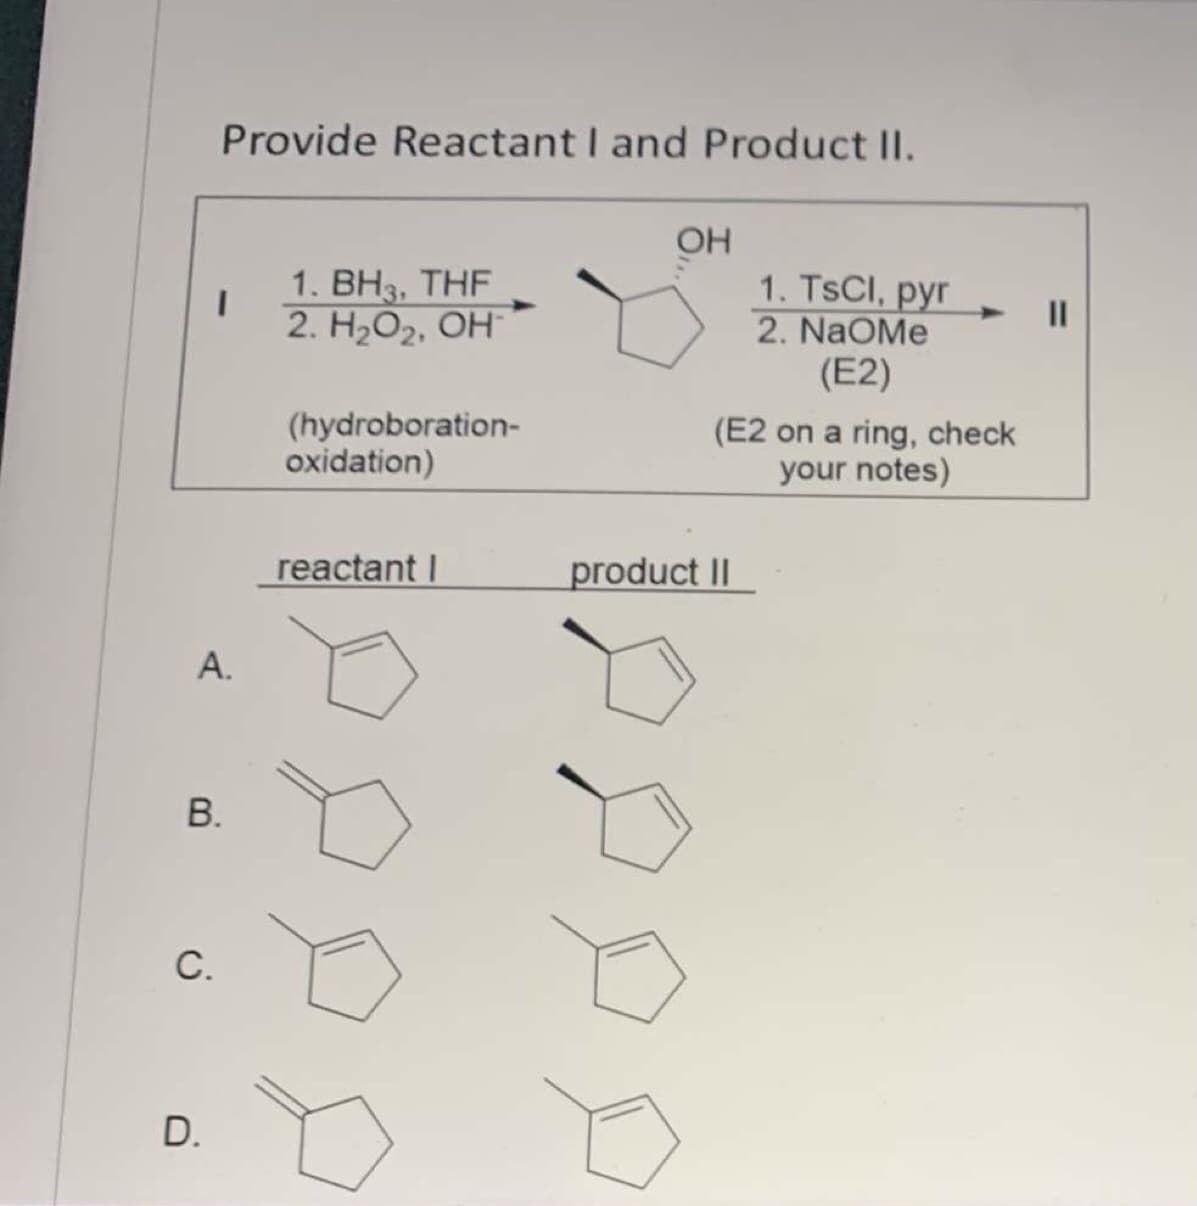 Provide Reactant I and Product II.
OH
1. TSCI, pyr
2. NaOMe
(E2)
1. ВНз. THF
2. Н,О, ОН"
II
(hydroboration-
oxidation)
(E2 on a ring, check
your notes)
reactant I
product II
А.
В.
С.
D.
A.
